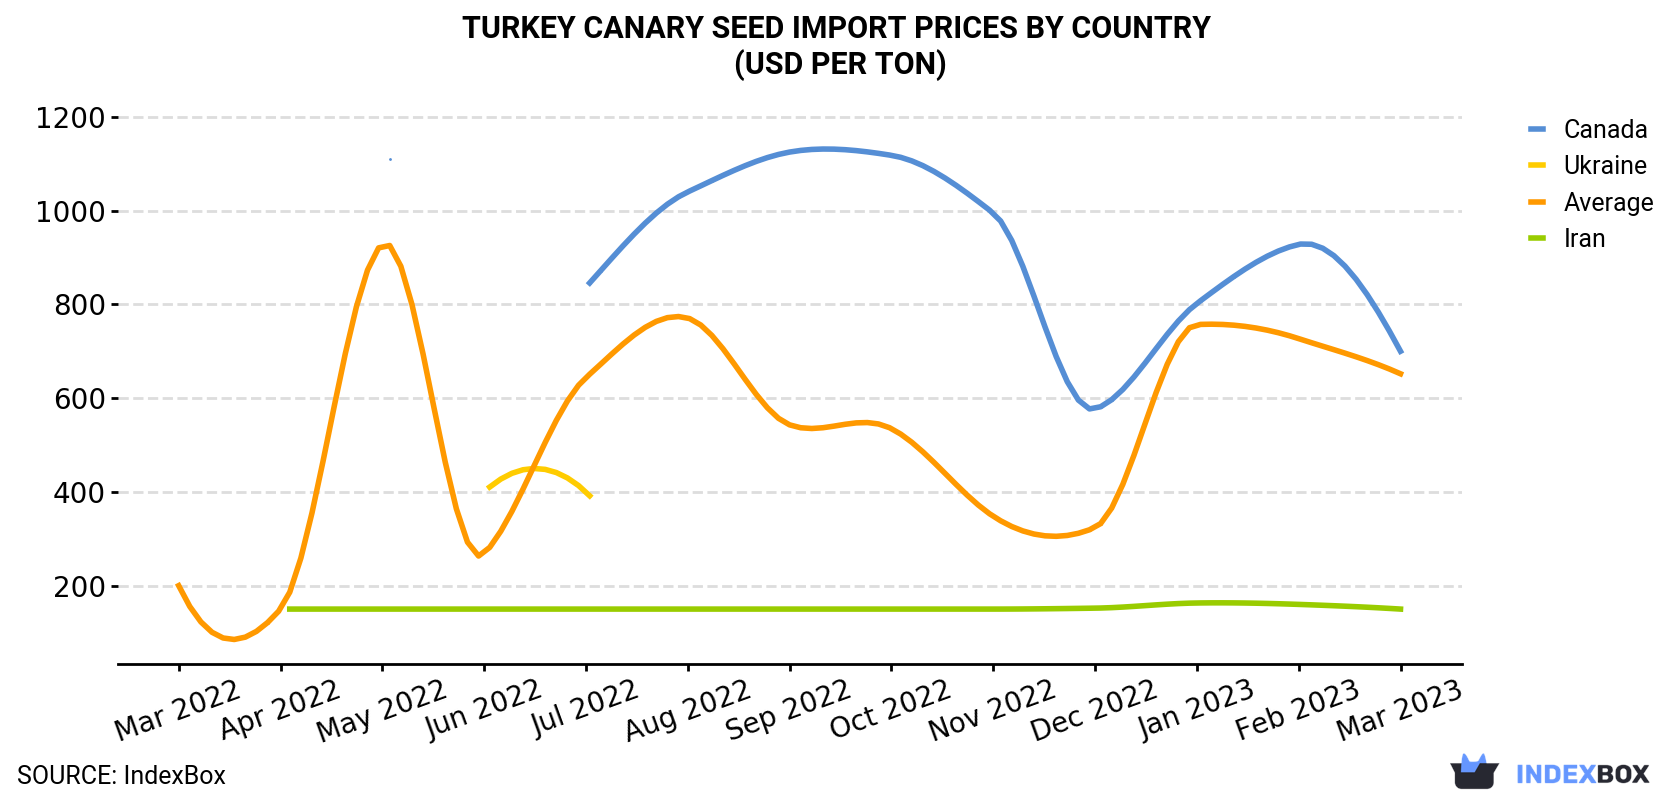 Turkey Canary Seed Import Prices By Country (USD Per Ton)